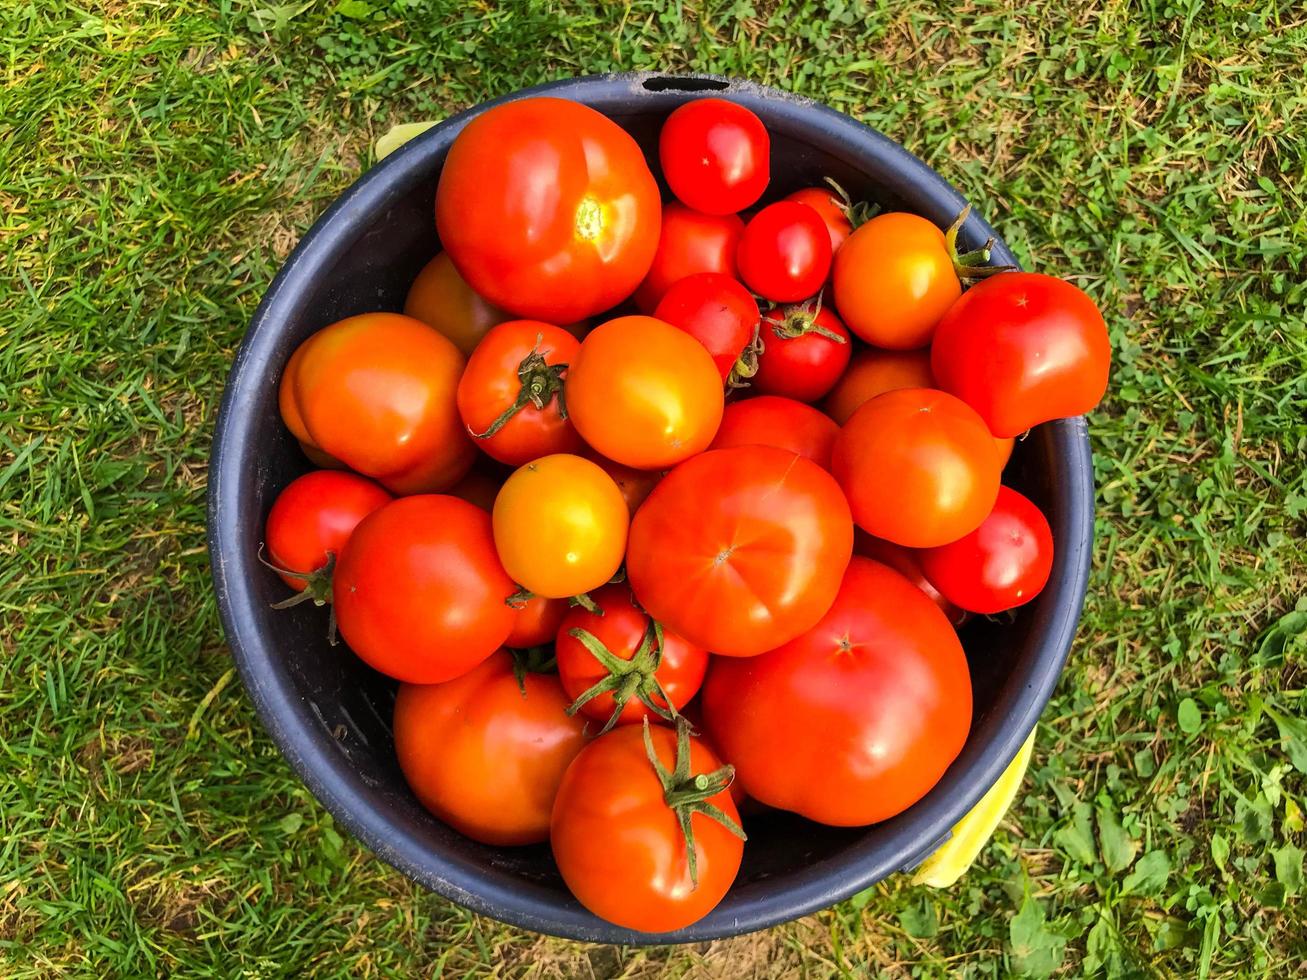 tomatoes lie in a blue bucket on a background of grass. vegetables are collected from greenhouses and garden beds. harvesting in autumn. creating seams. healthy snack. pasta for pizza. ketchup photo